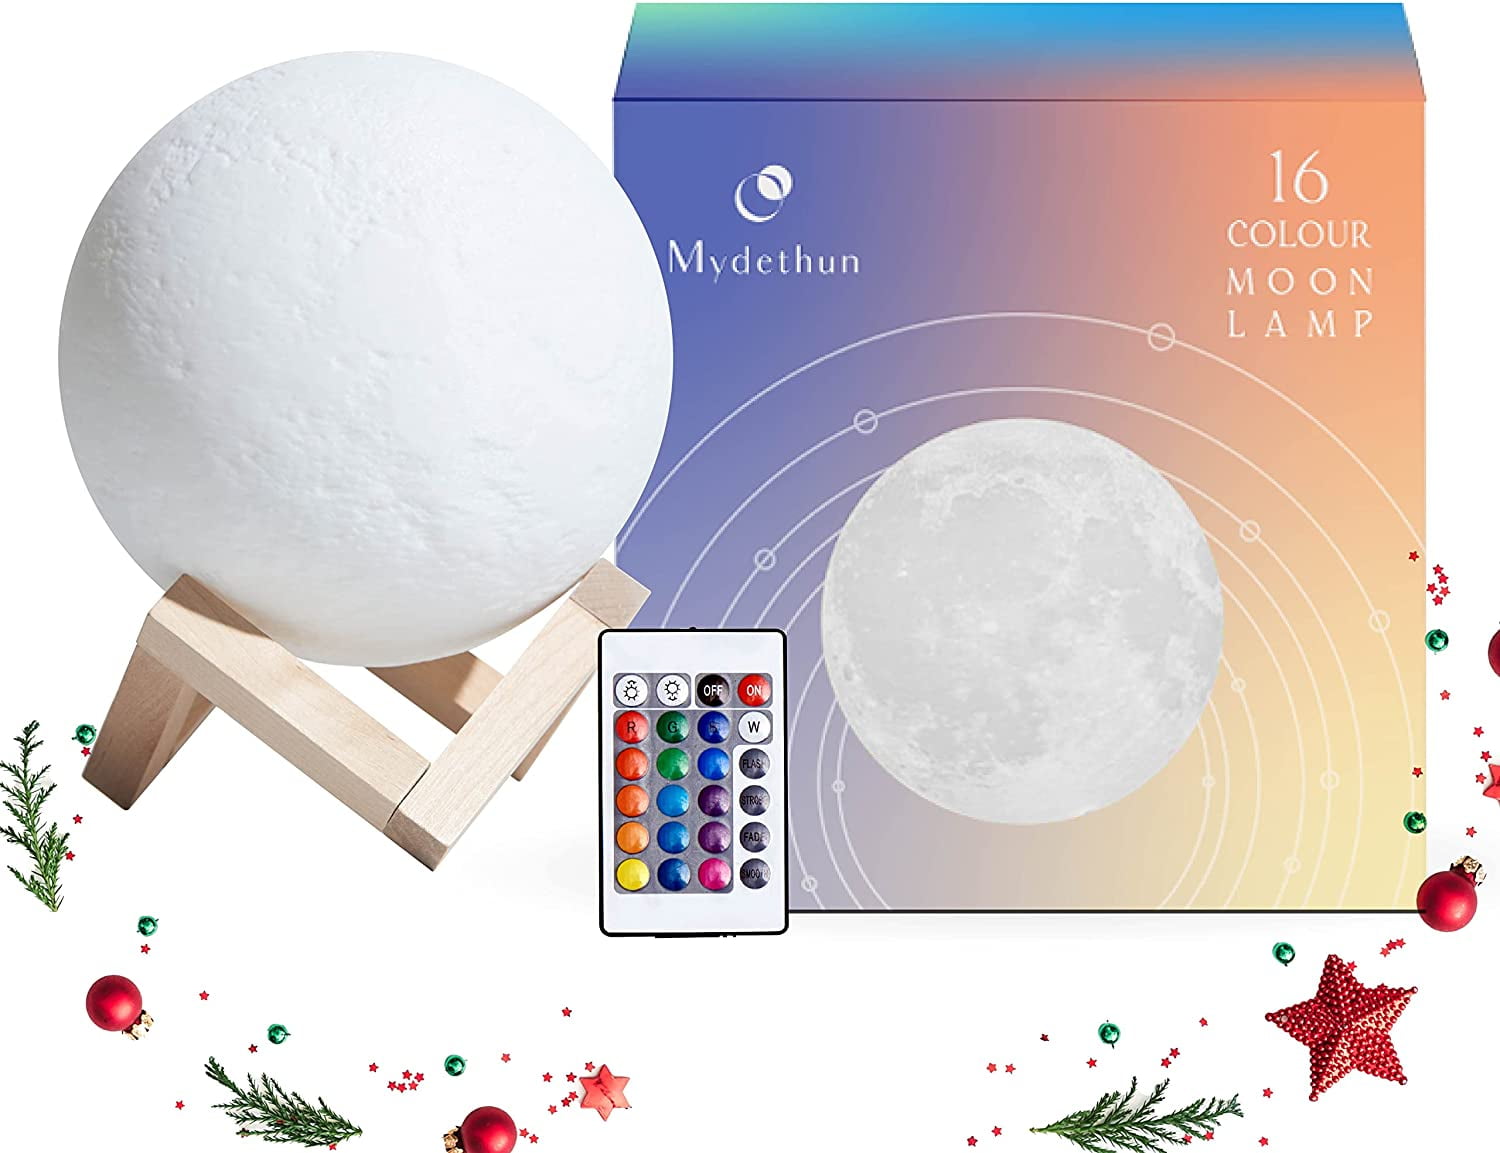  Paint Your Own Moon Lamp Kit, 16 Colors Rechargeable DIY 3D  Moon Night Light Arts and Crafts Kit, Art Supplies Birthday Gifts for Kids  Girls Boys Teens Ages 5 6 7